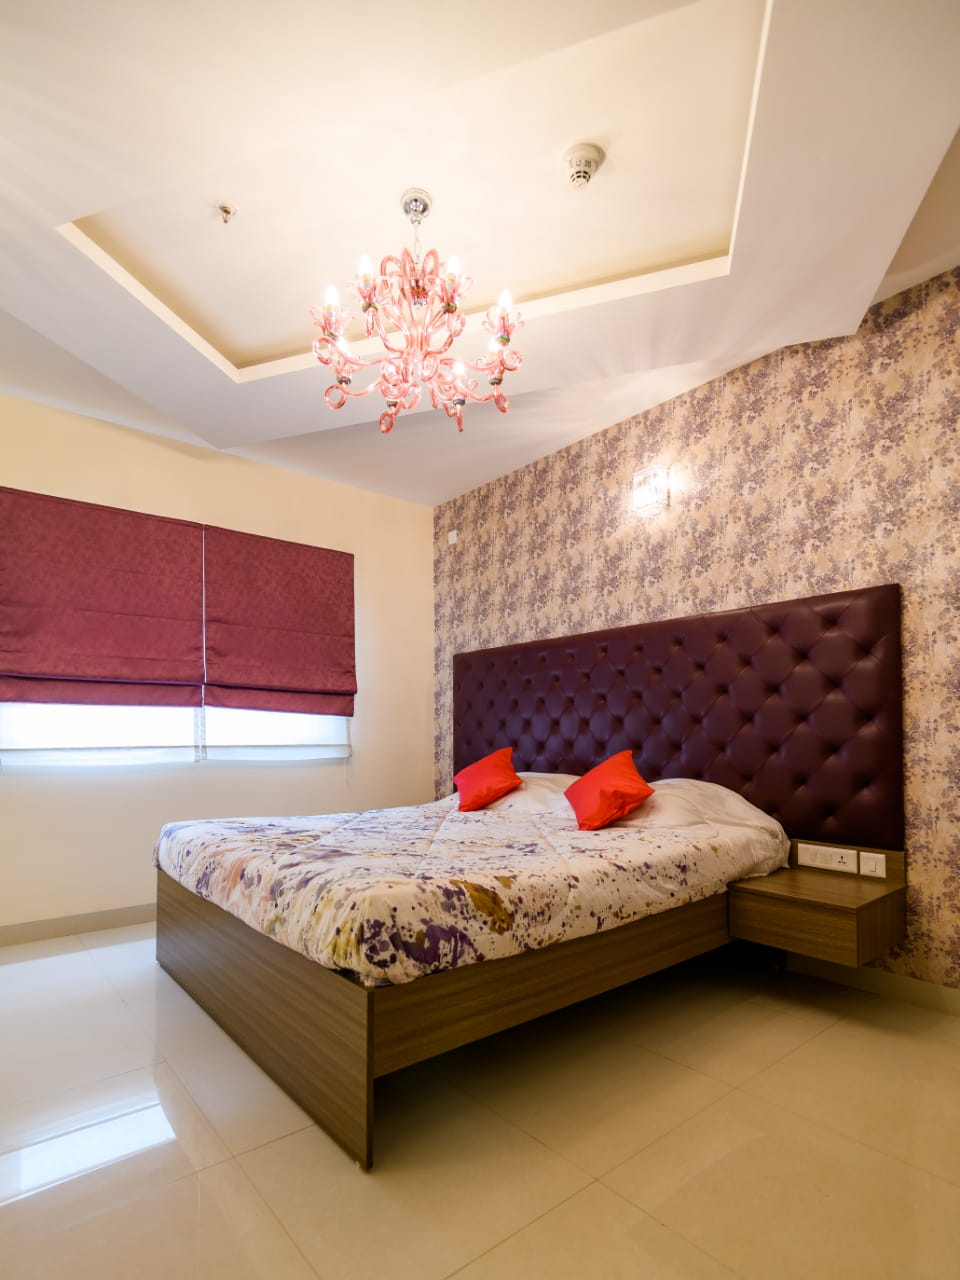 Premier Abodes, the best Bedroom Interior Designers in Bangalore We love the easy feel of this cutting-edge boho-propelled space.